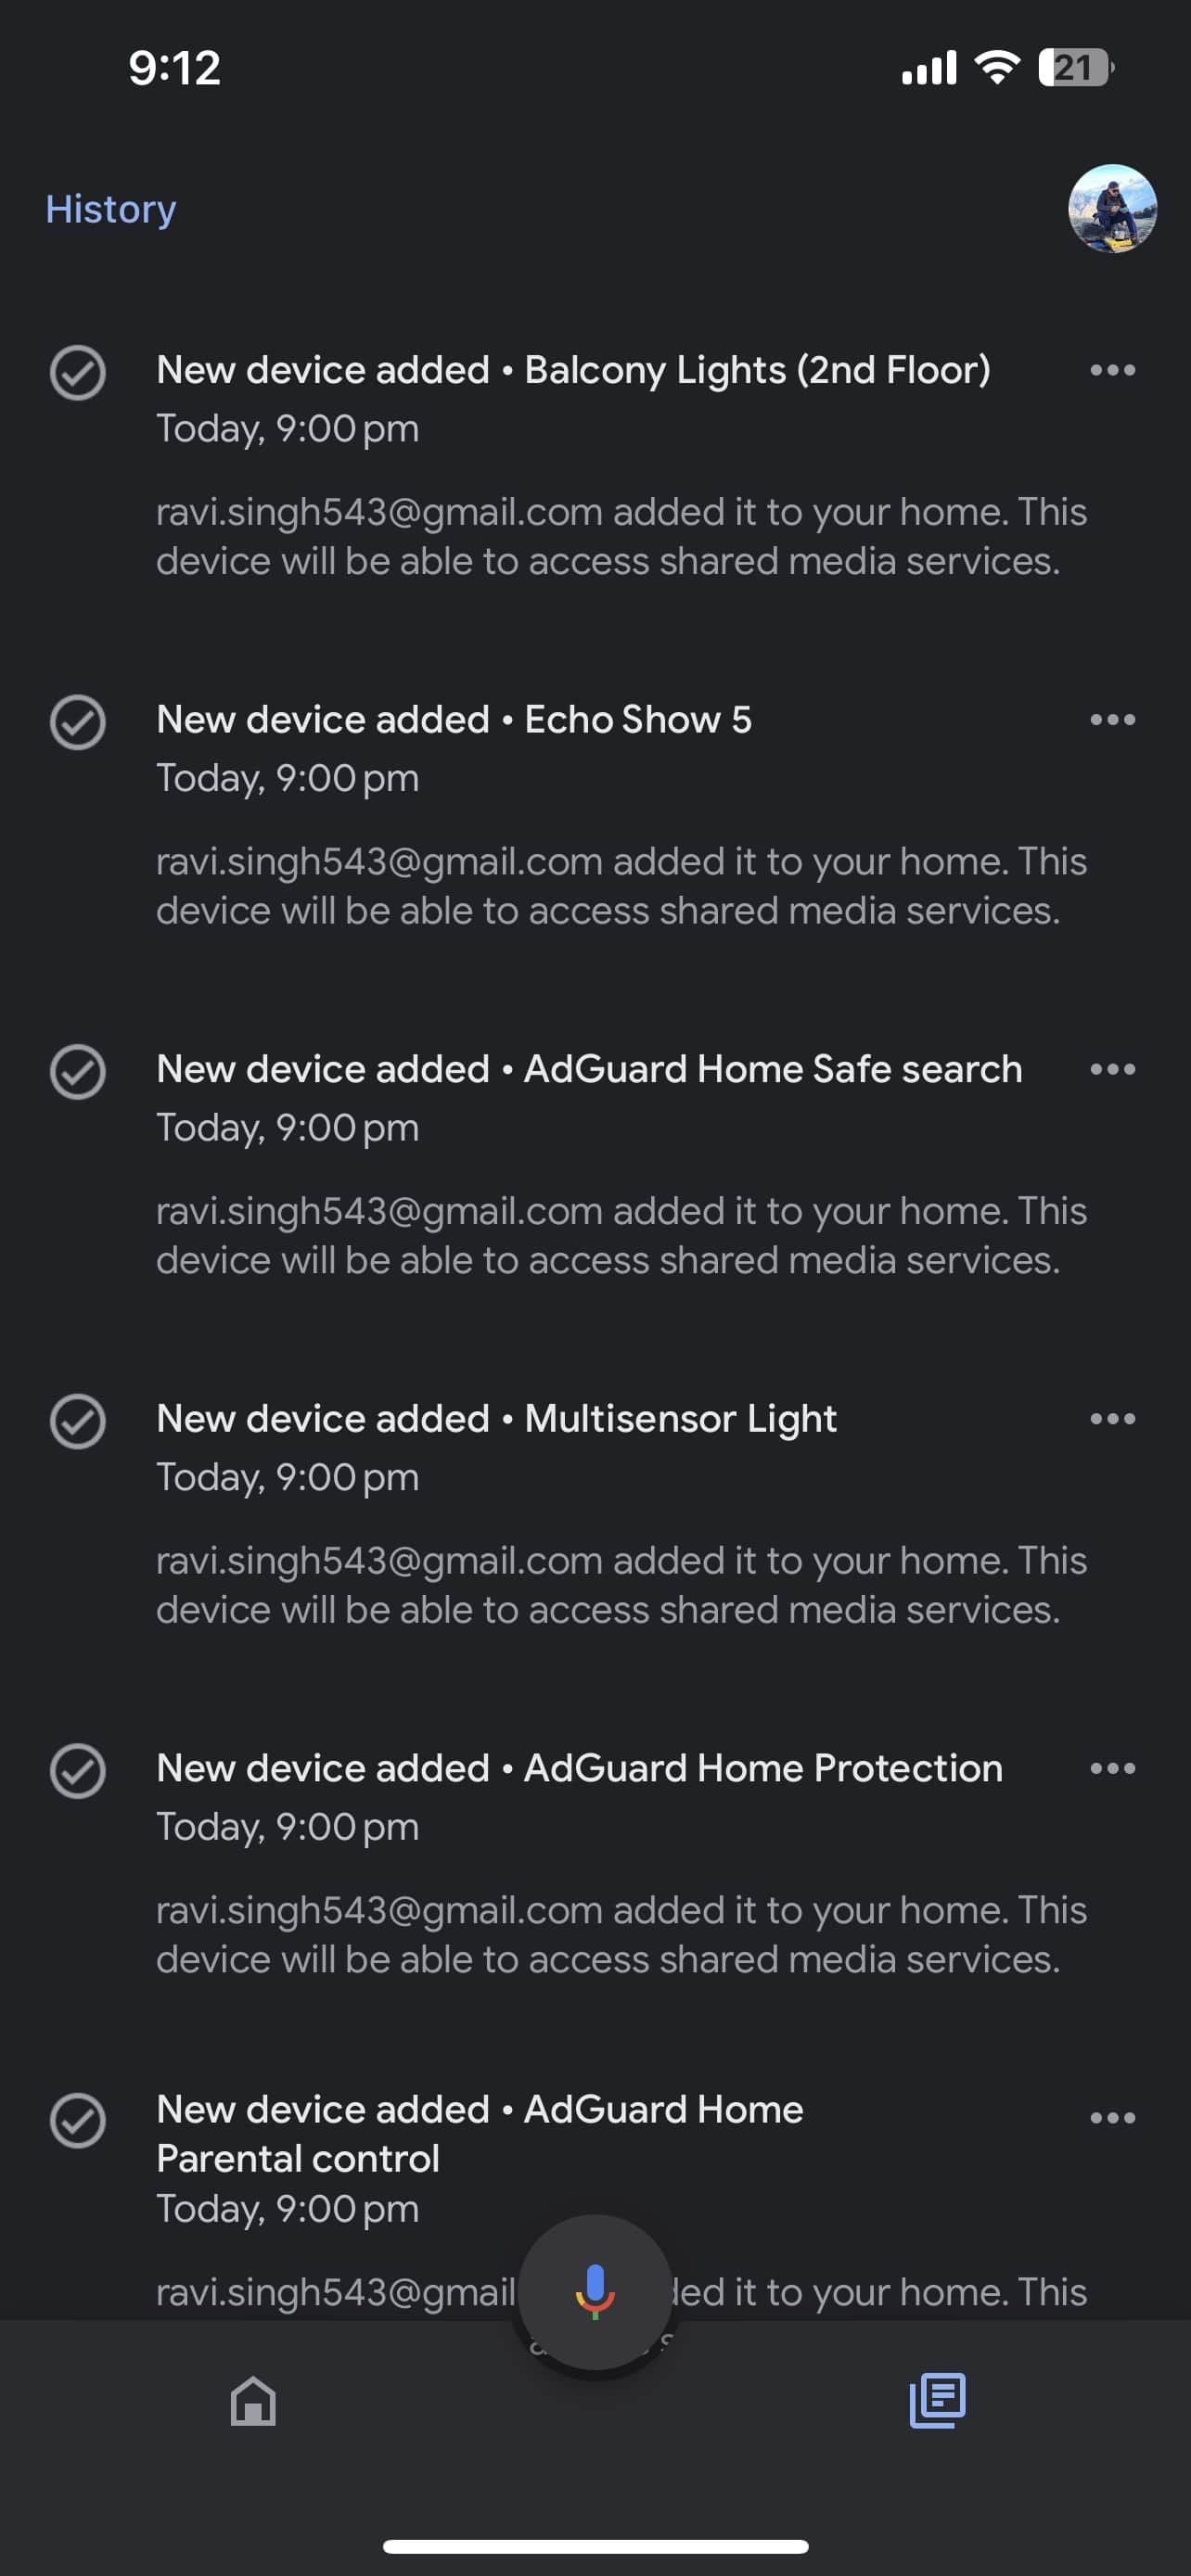 all devices from home assistant added to google home app